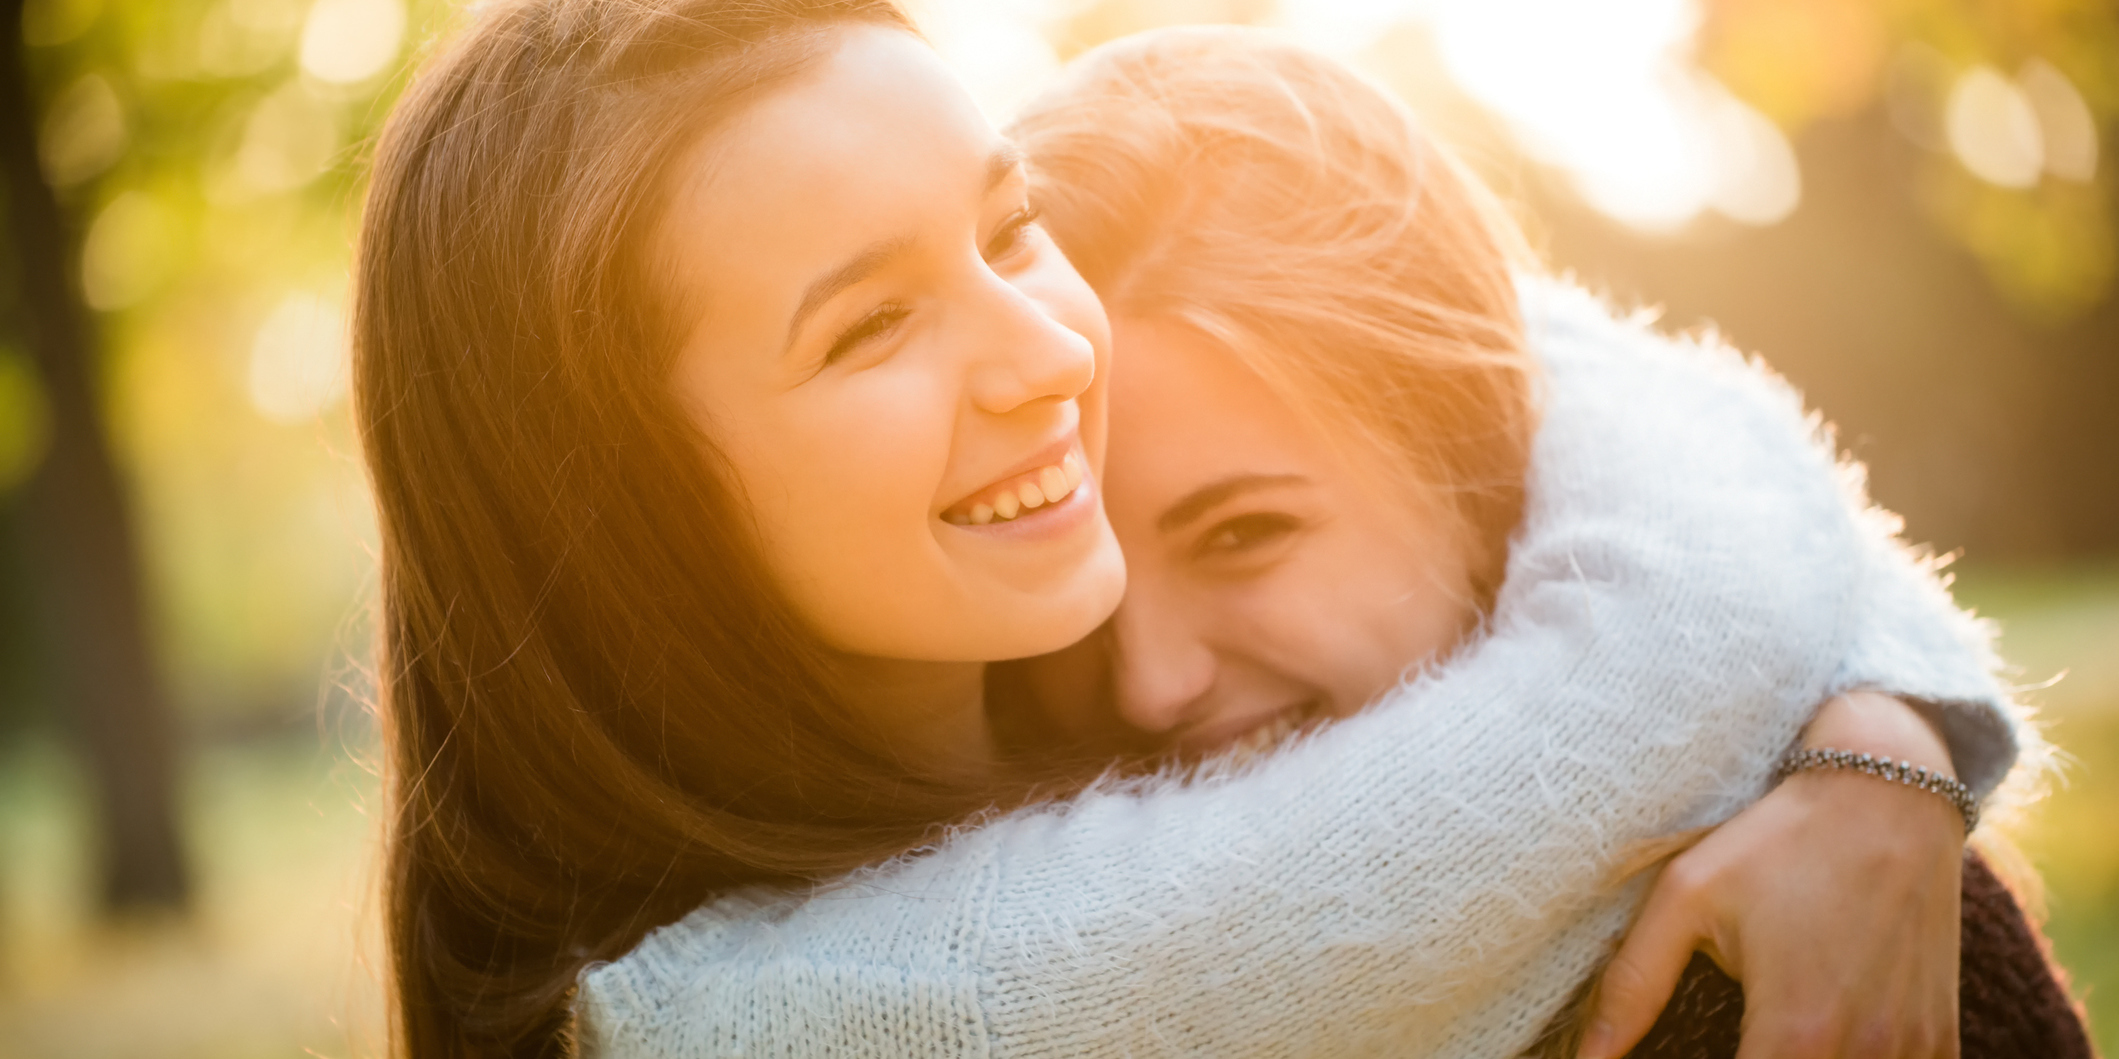 How to Support a Friend With Chronic Illness and Their Partner